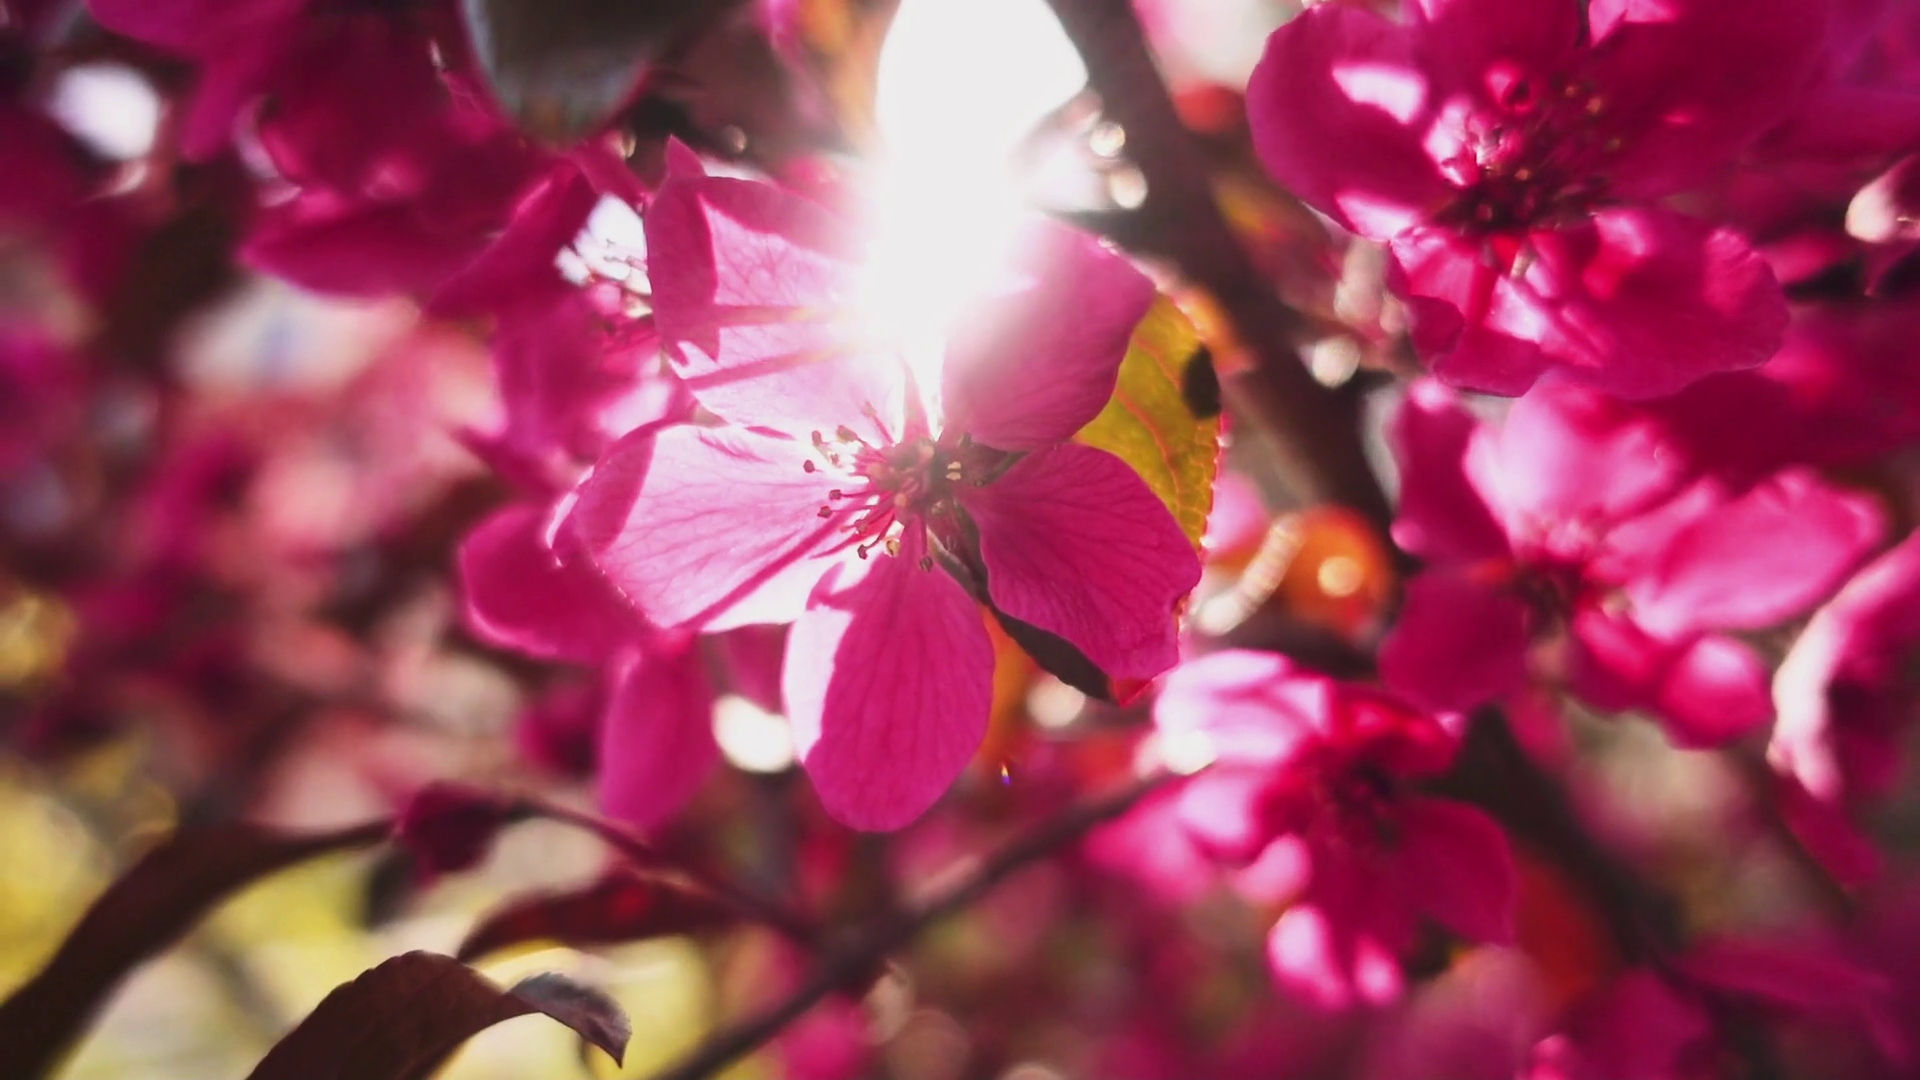 SLOW MOTION 120 fps: Spring Blossom Over Sunset Sky. Beautiful ...